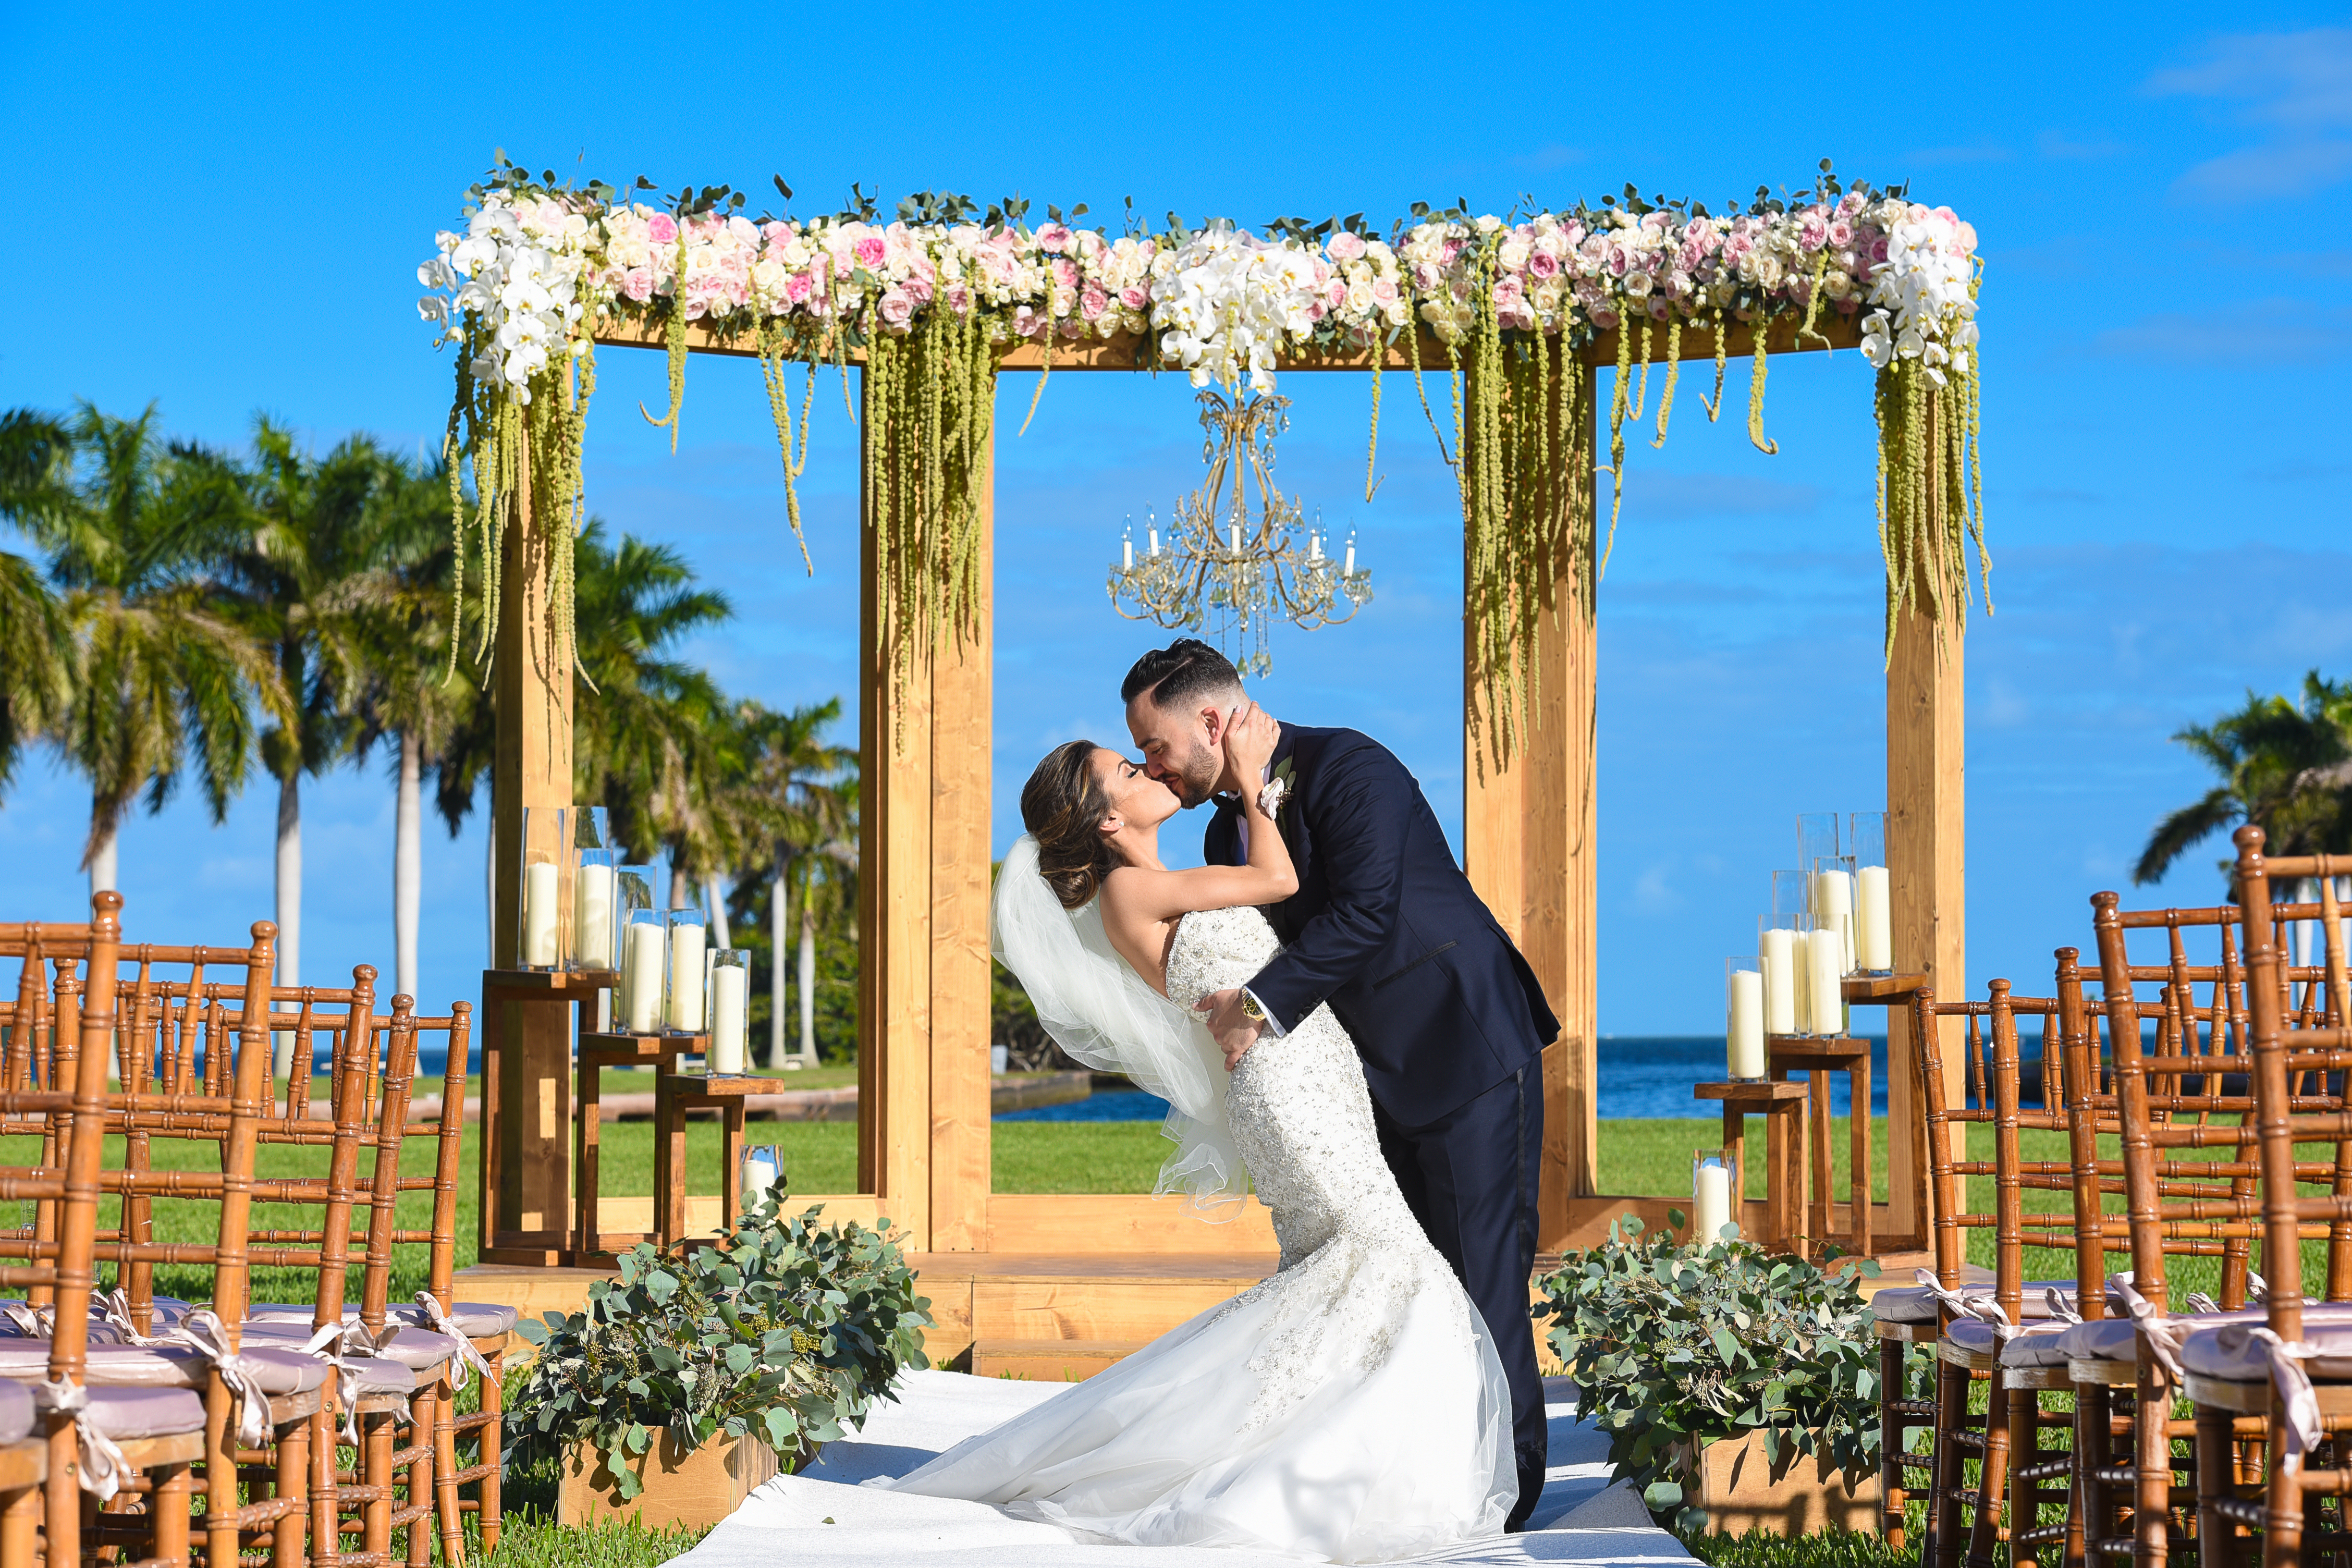 A bride and groom kissing under an arch.